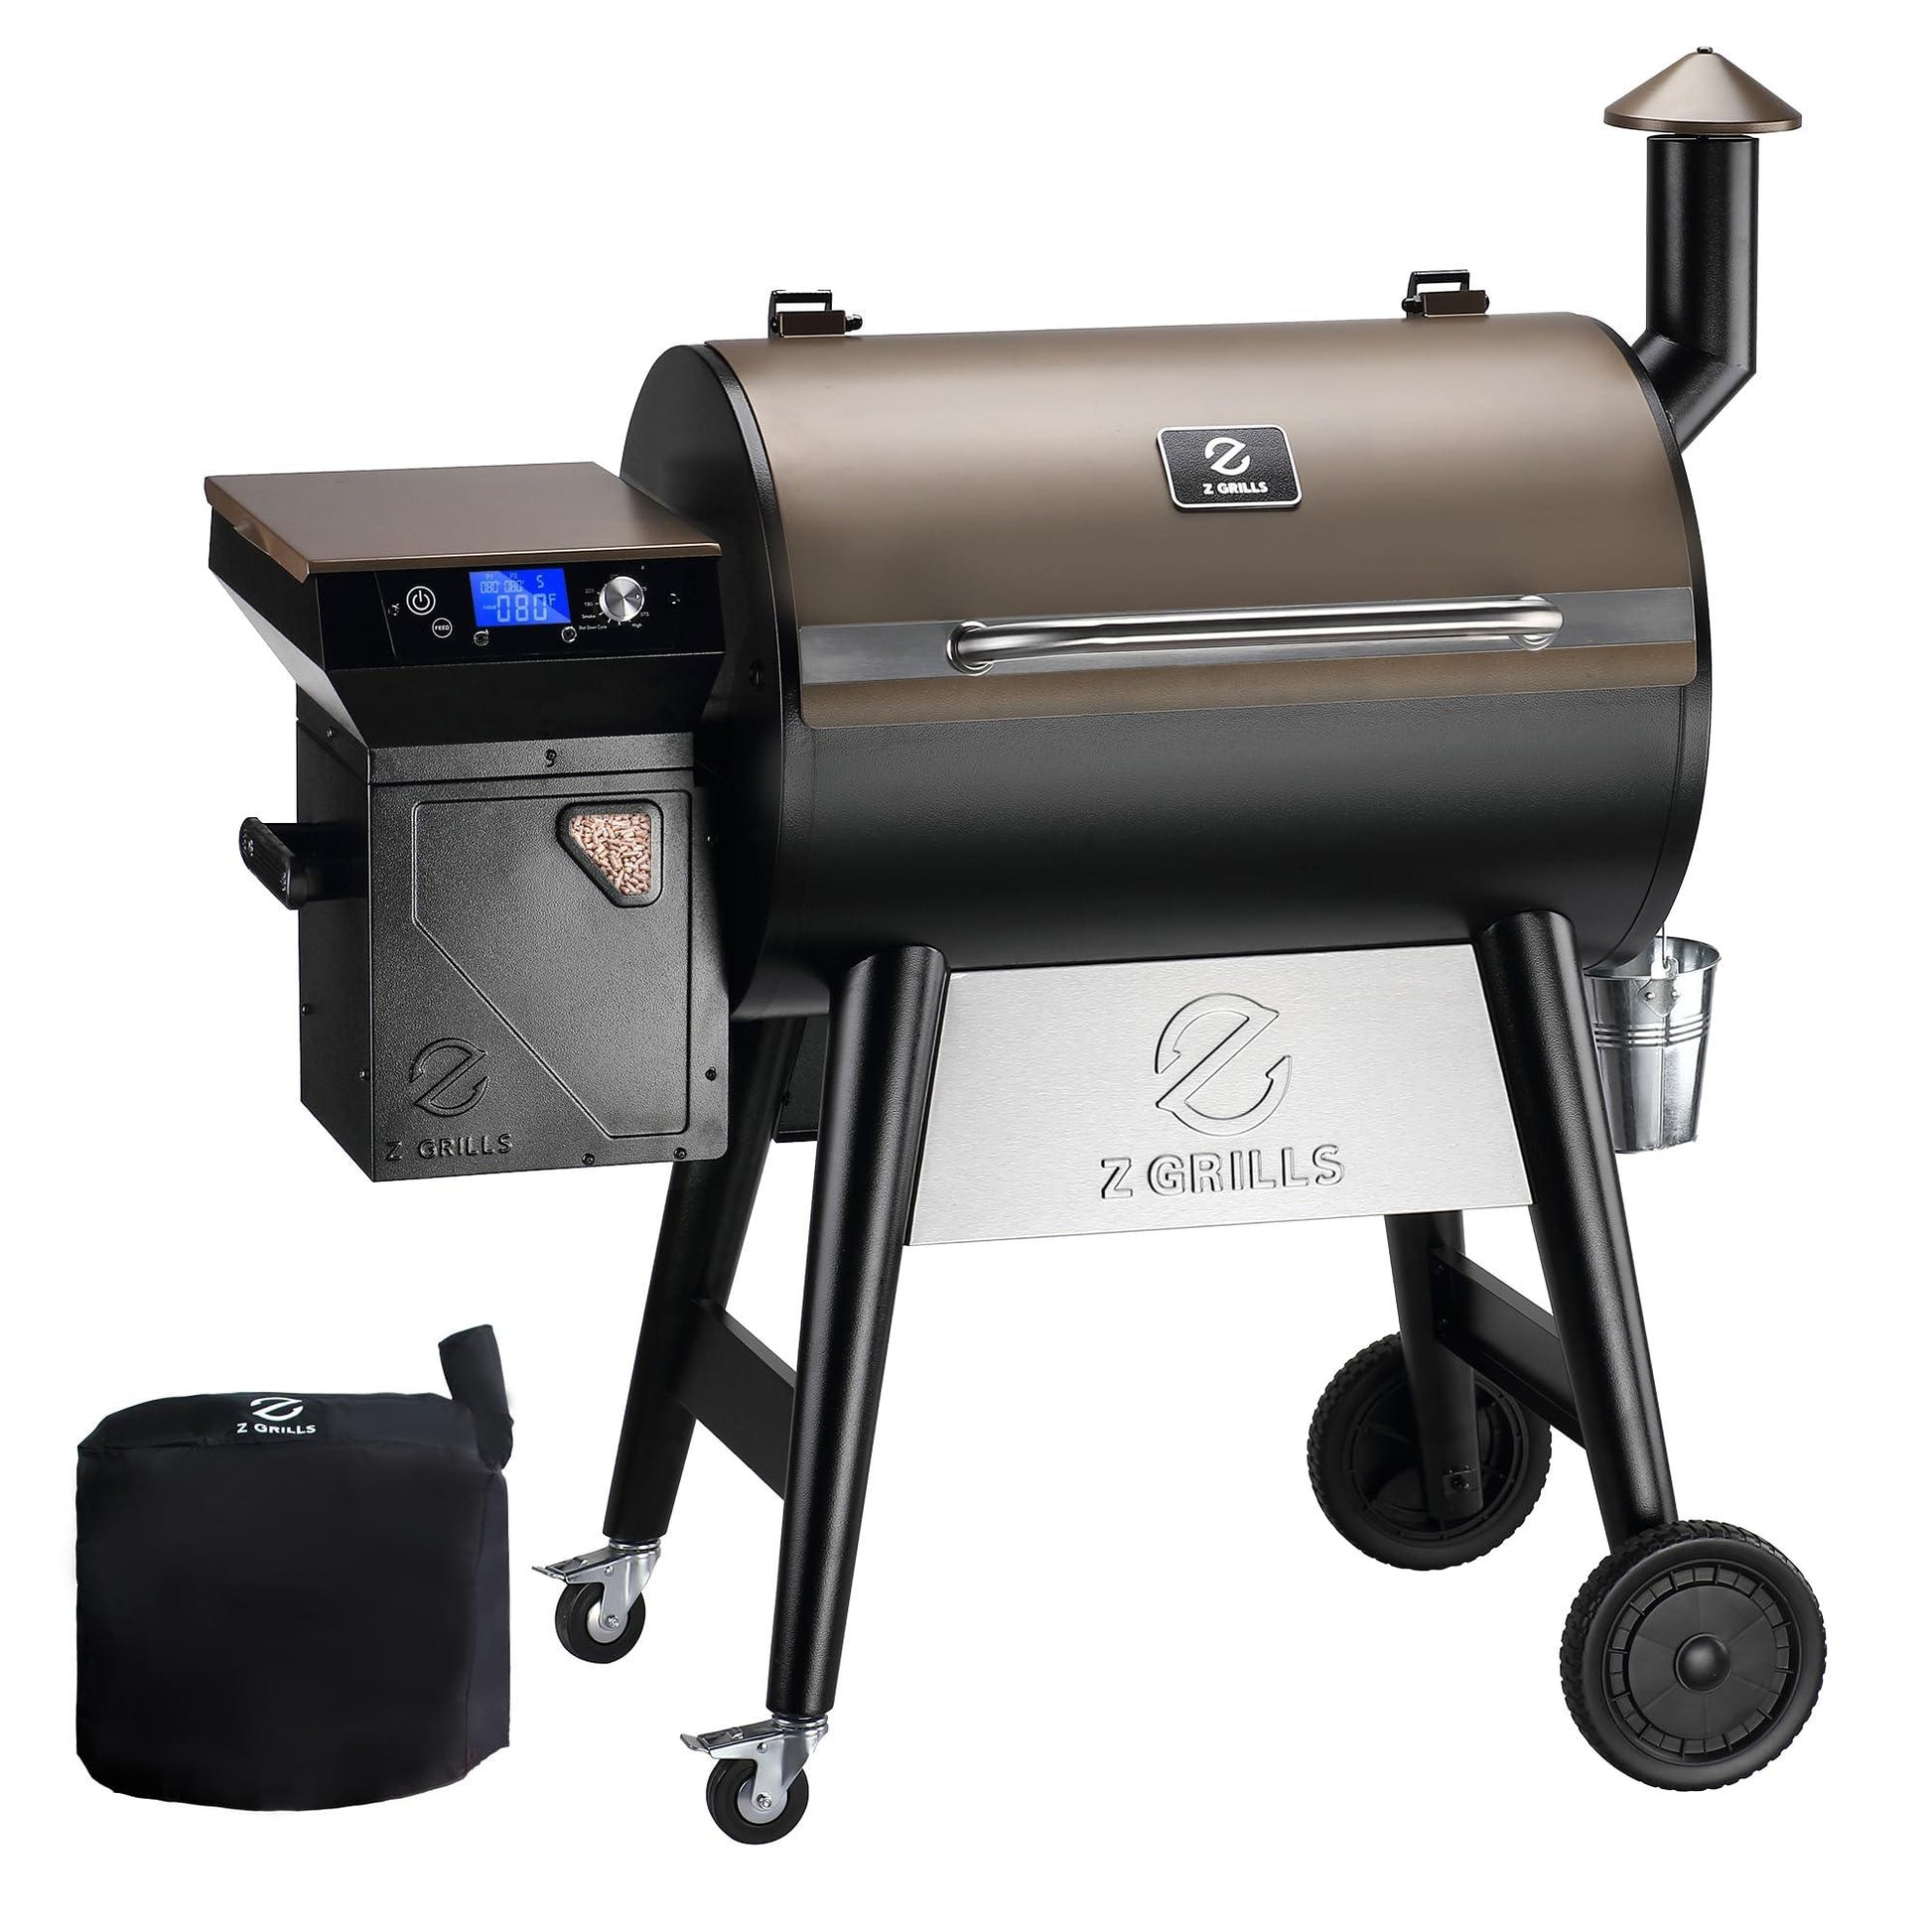 Z GRILLS Wood Pellet Grill Smoker with PID 2.0 Controller, 700 Cooking Area, Meat Probes, Rain Cover for Outdoor BBQ, 7002C - CookCave